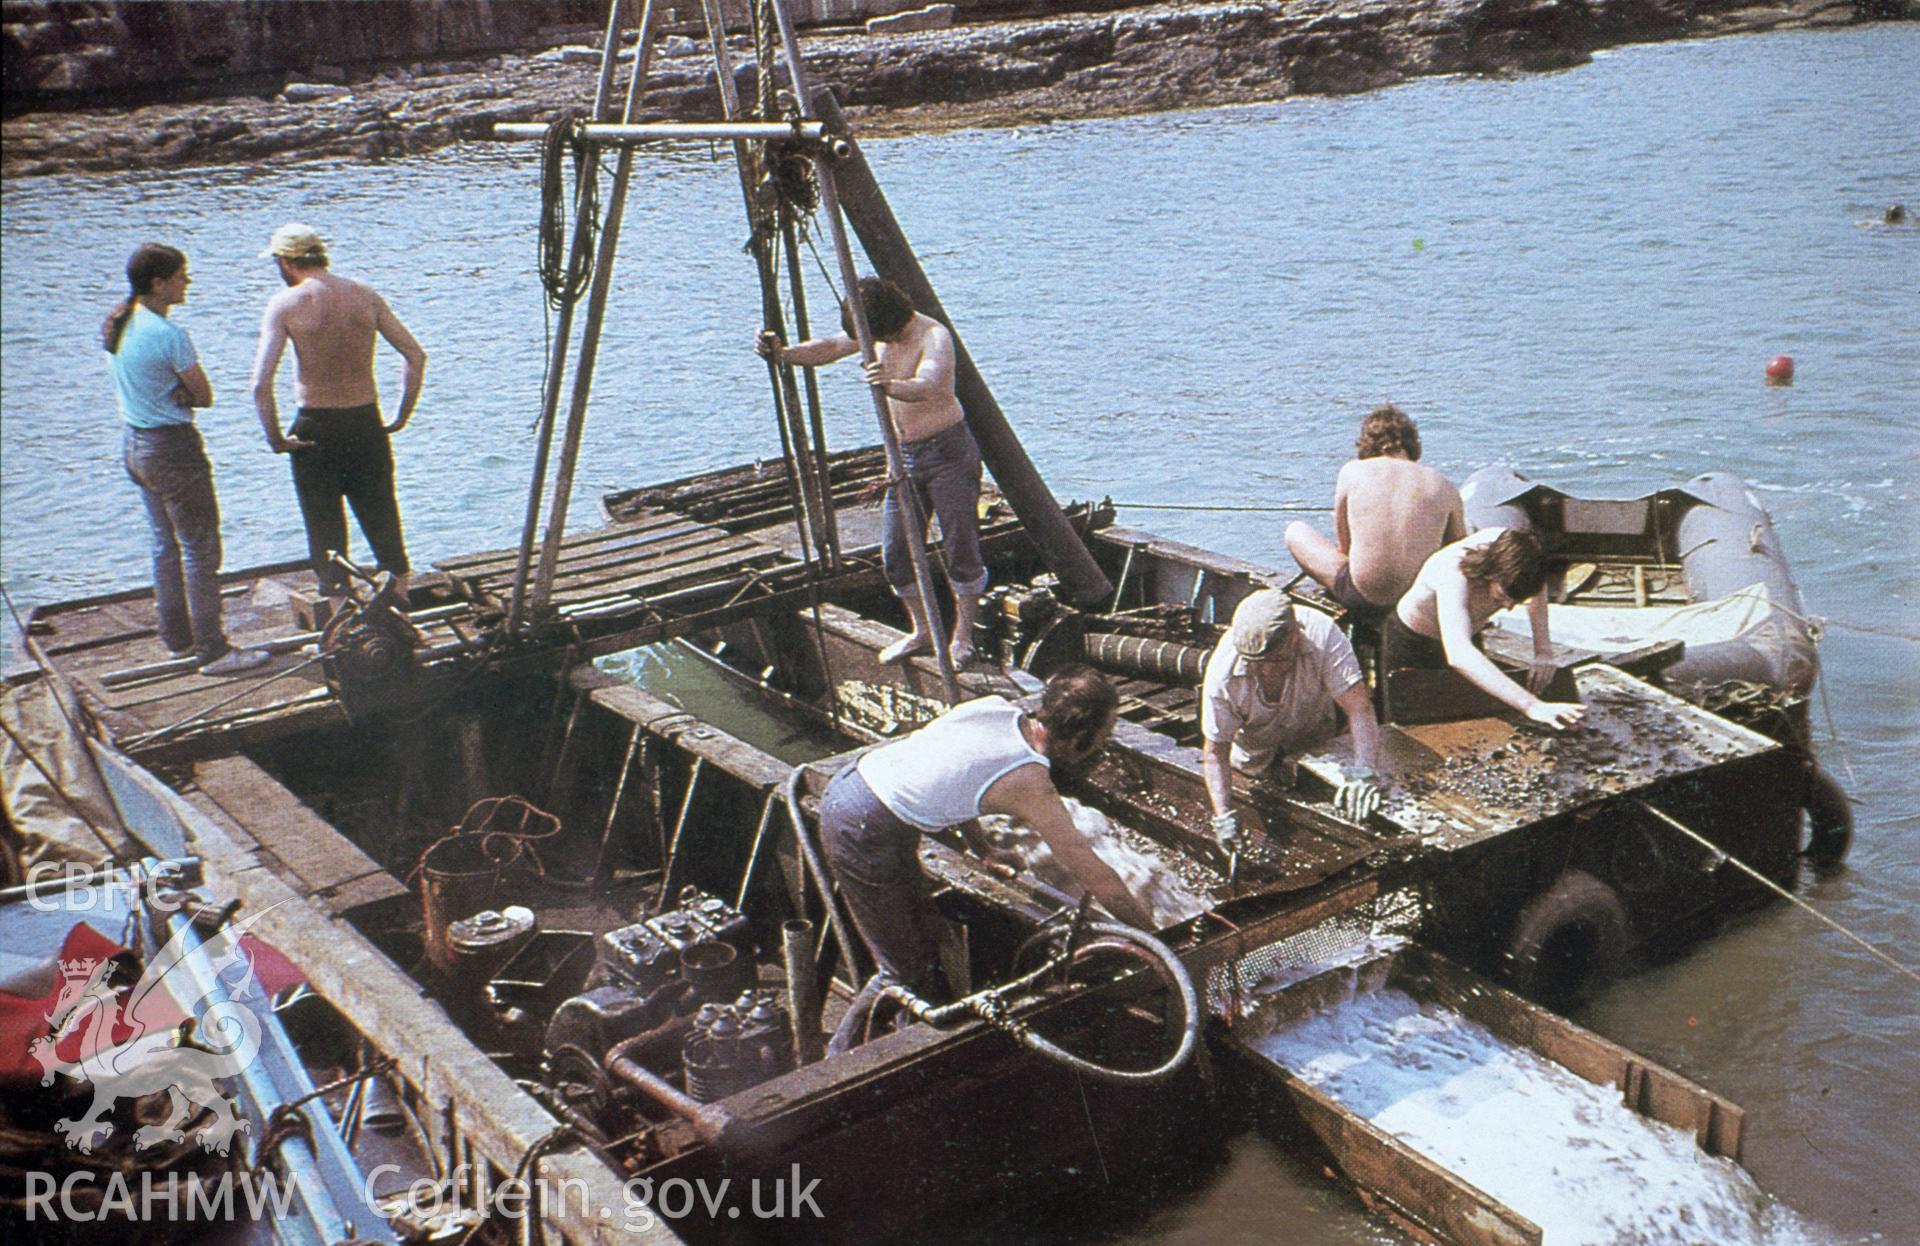 Four colour slides (two images duplicated) concerning the wreck of the Royal Charter, off Moelfre, produced by the Archaeological Diving Unit and picturing work over the site and finds from the wreck.